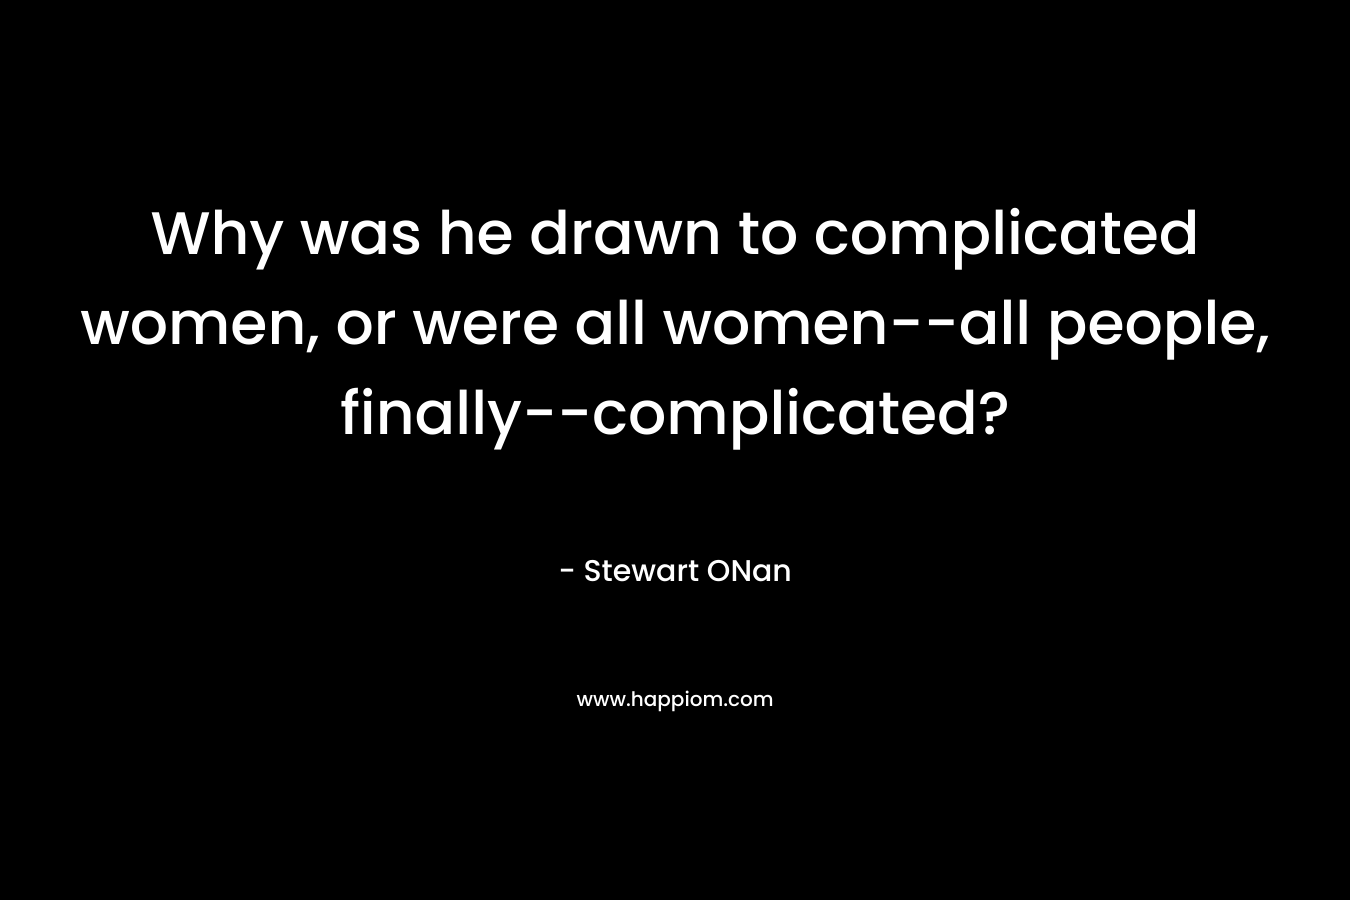 Why was he drawn to complicated women, or were all women--all people, finally--complicated?